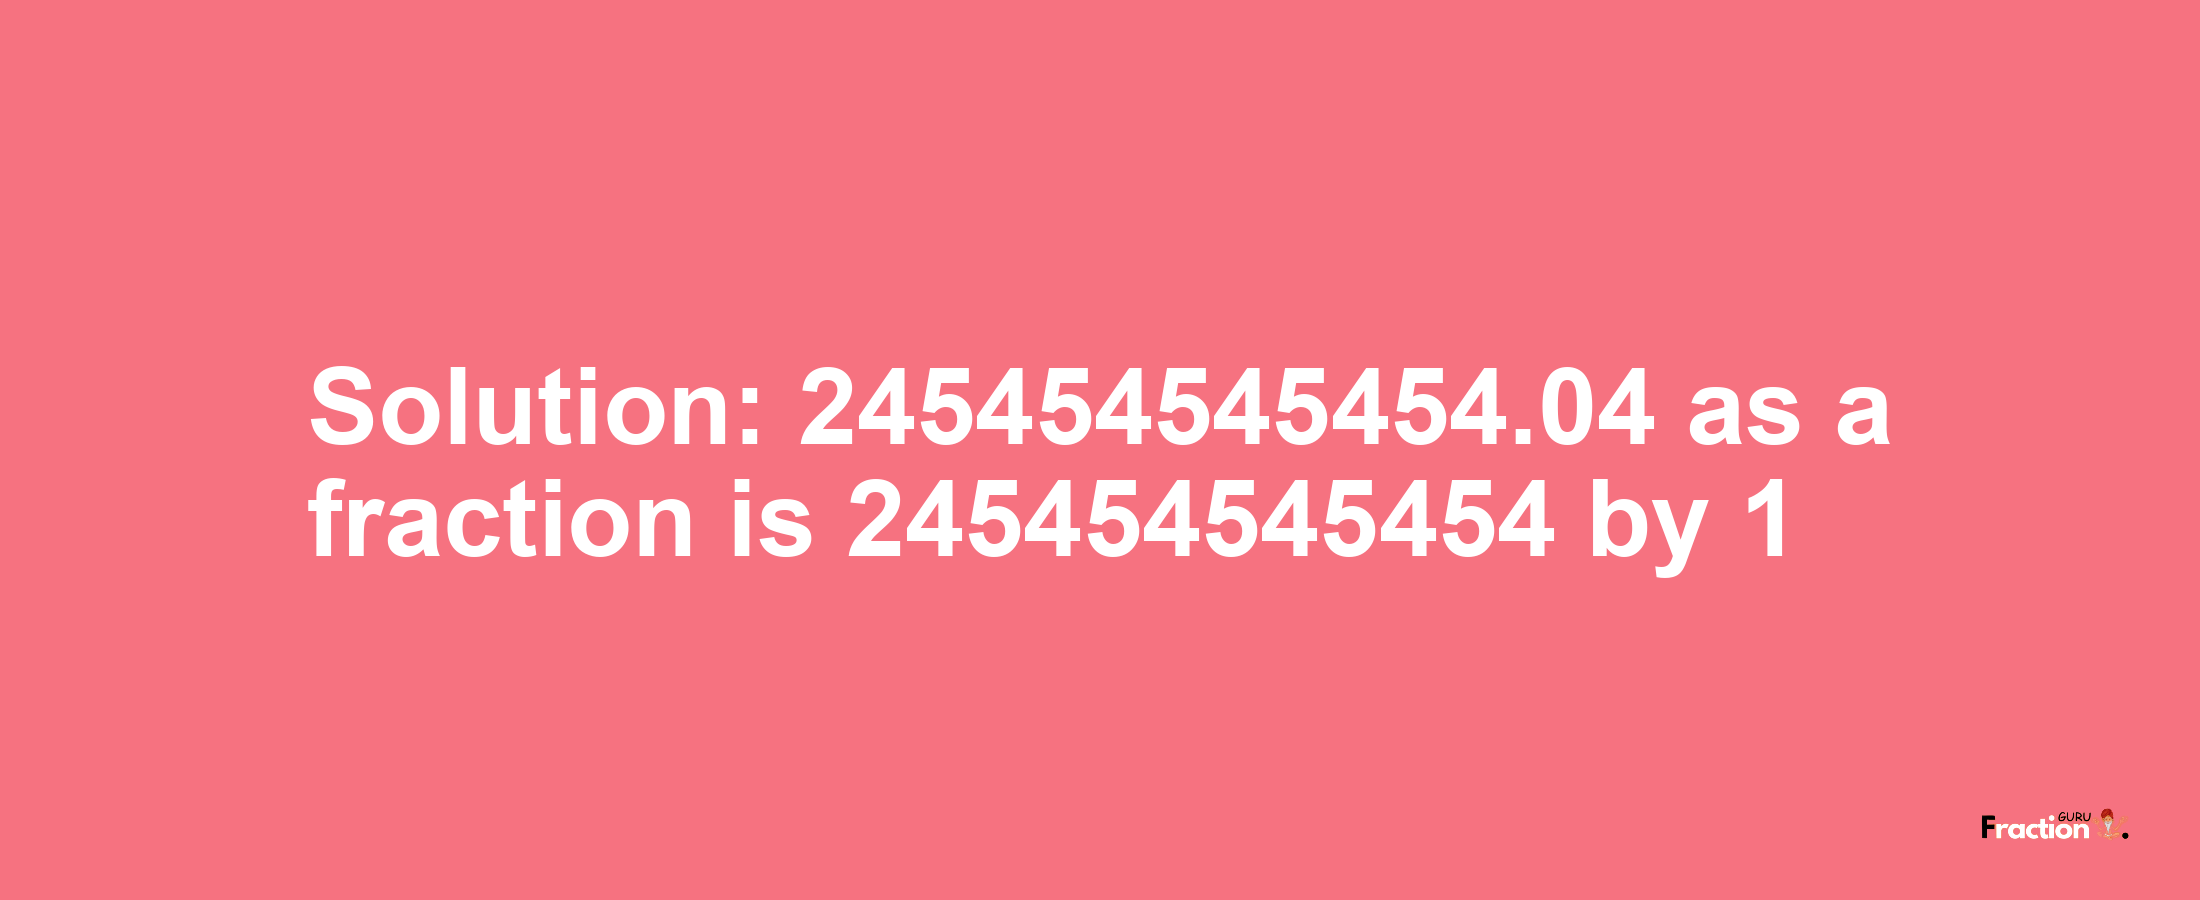 Solution:245454545454.04 as a fraction is 245454545454/1